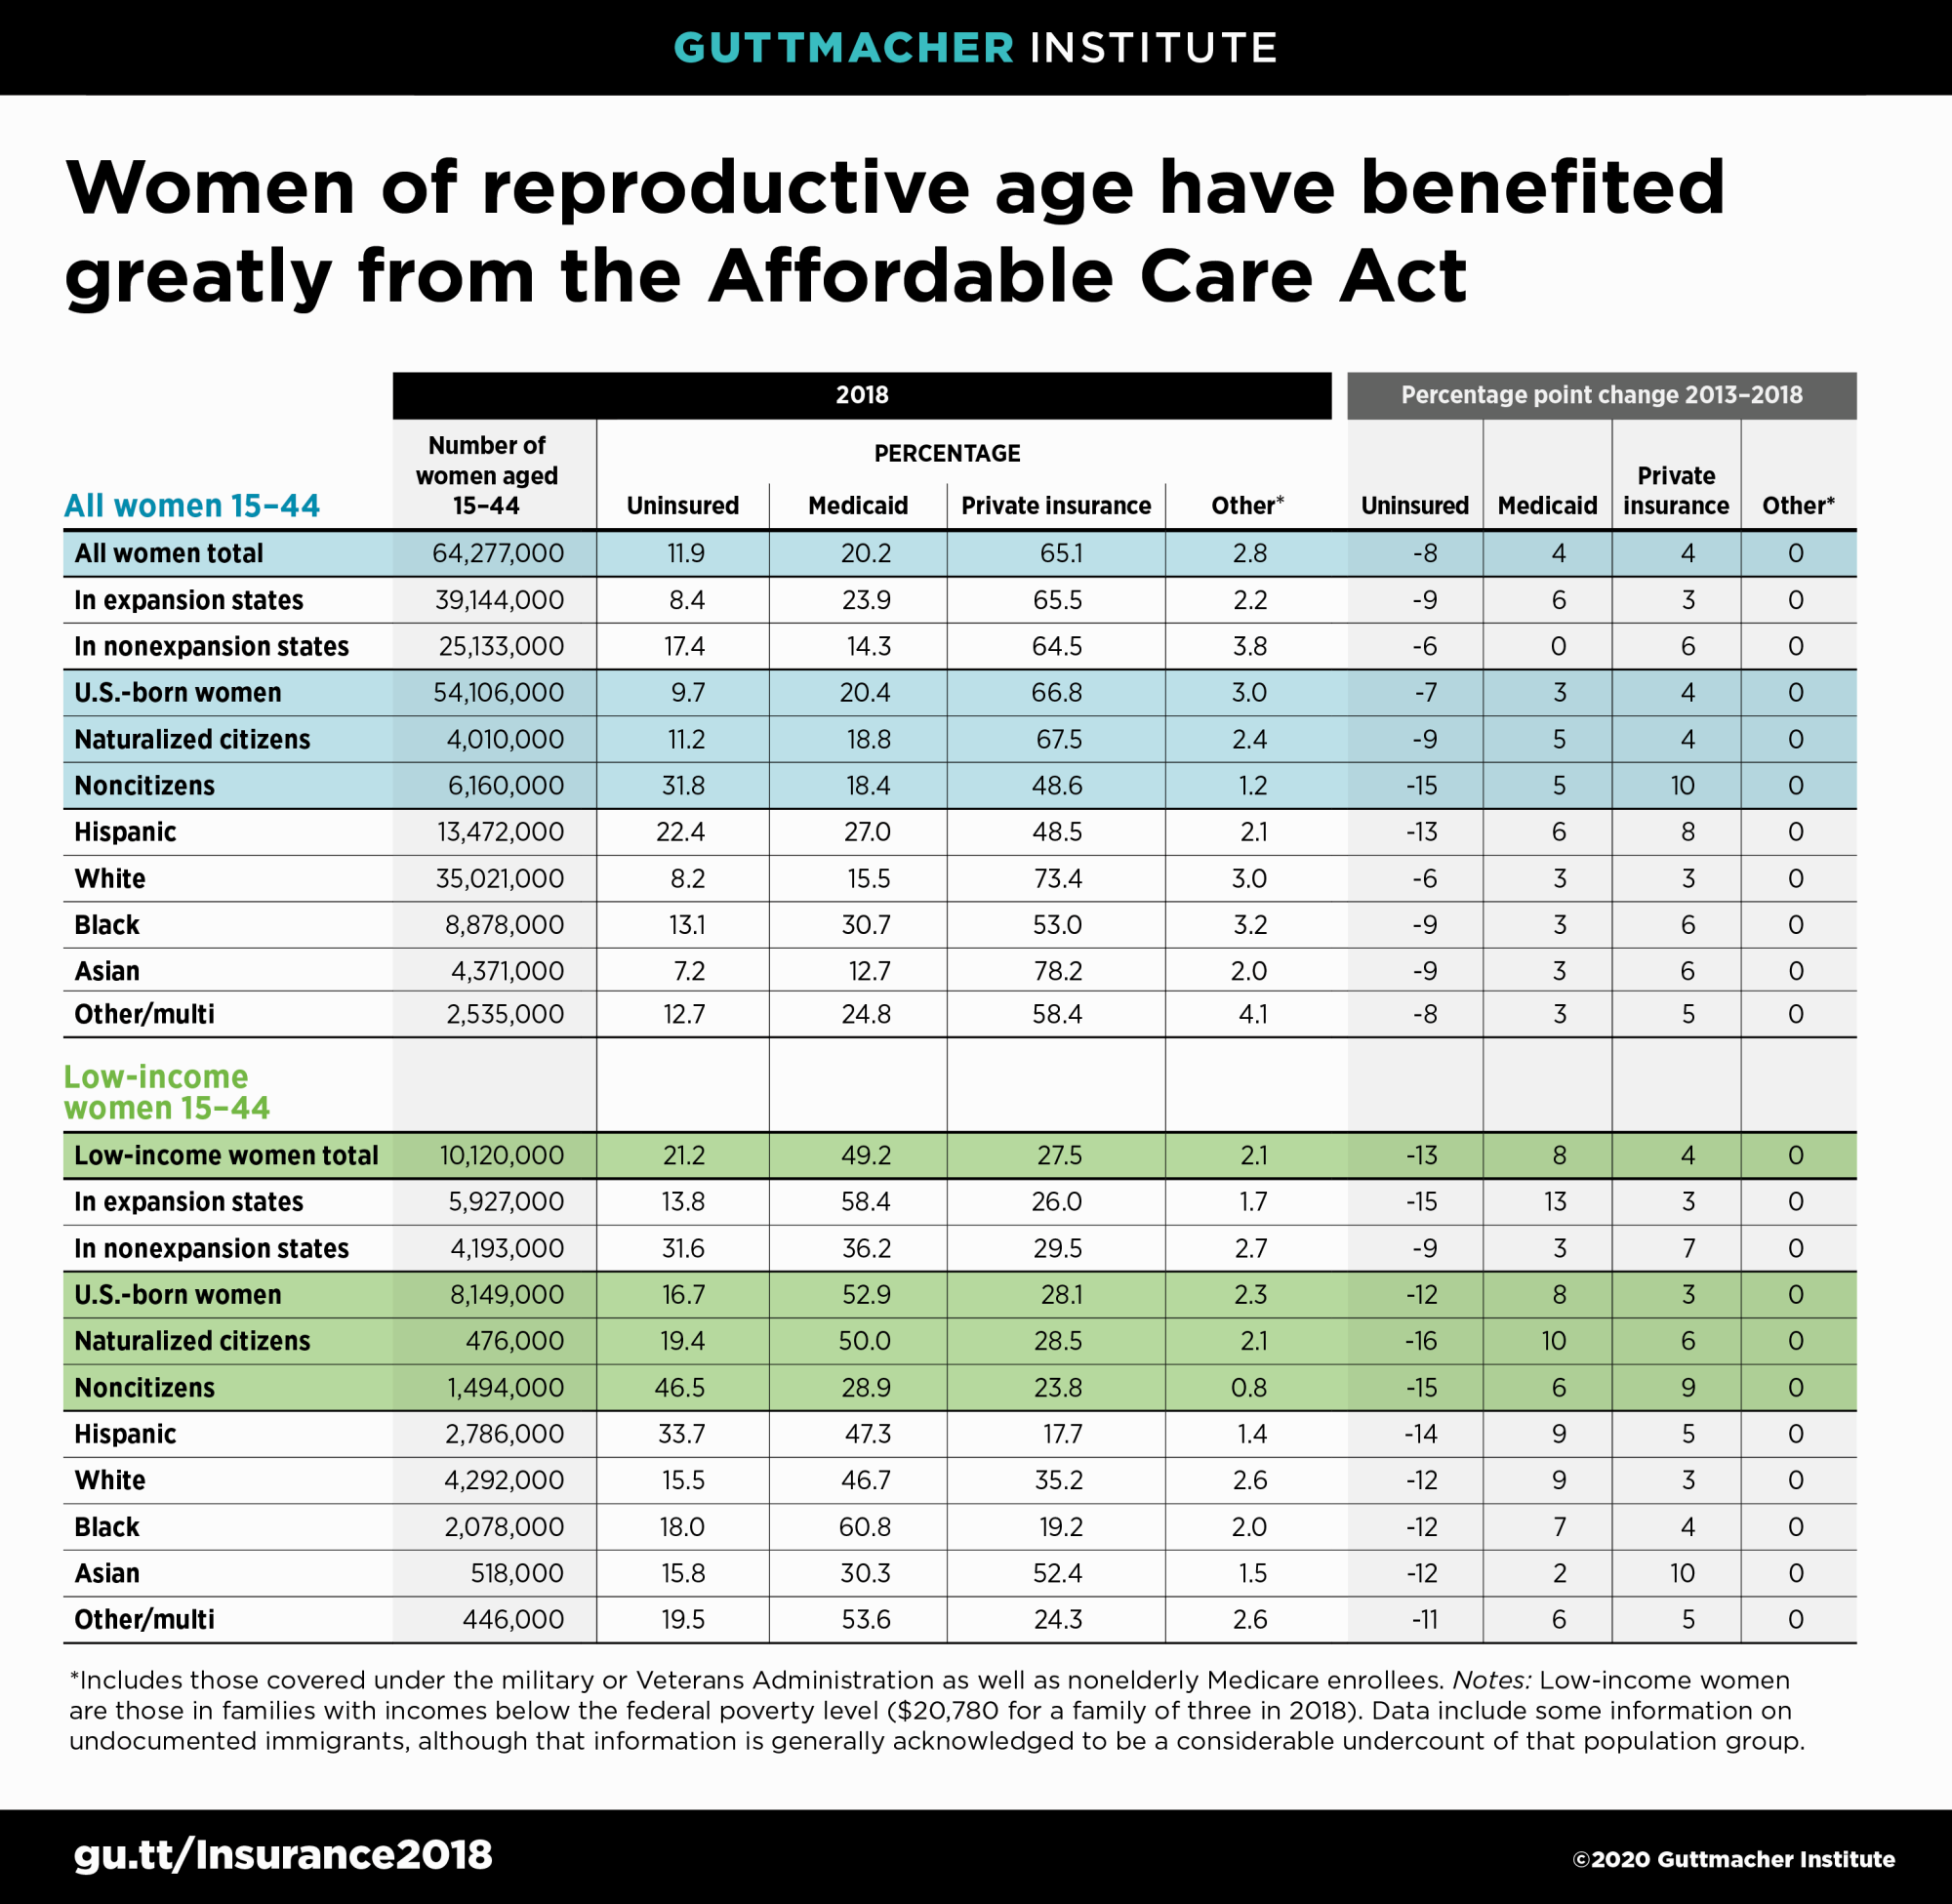 Women of reproductive age have benefited greatly from the ACA